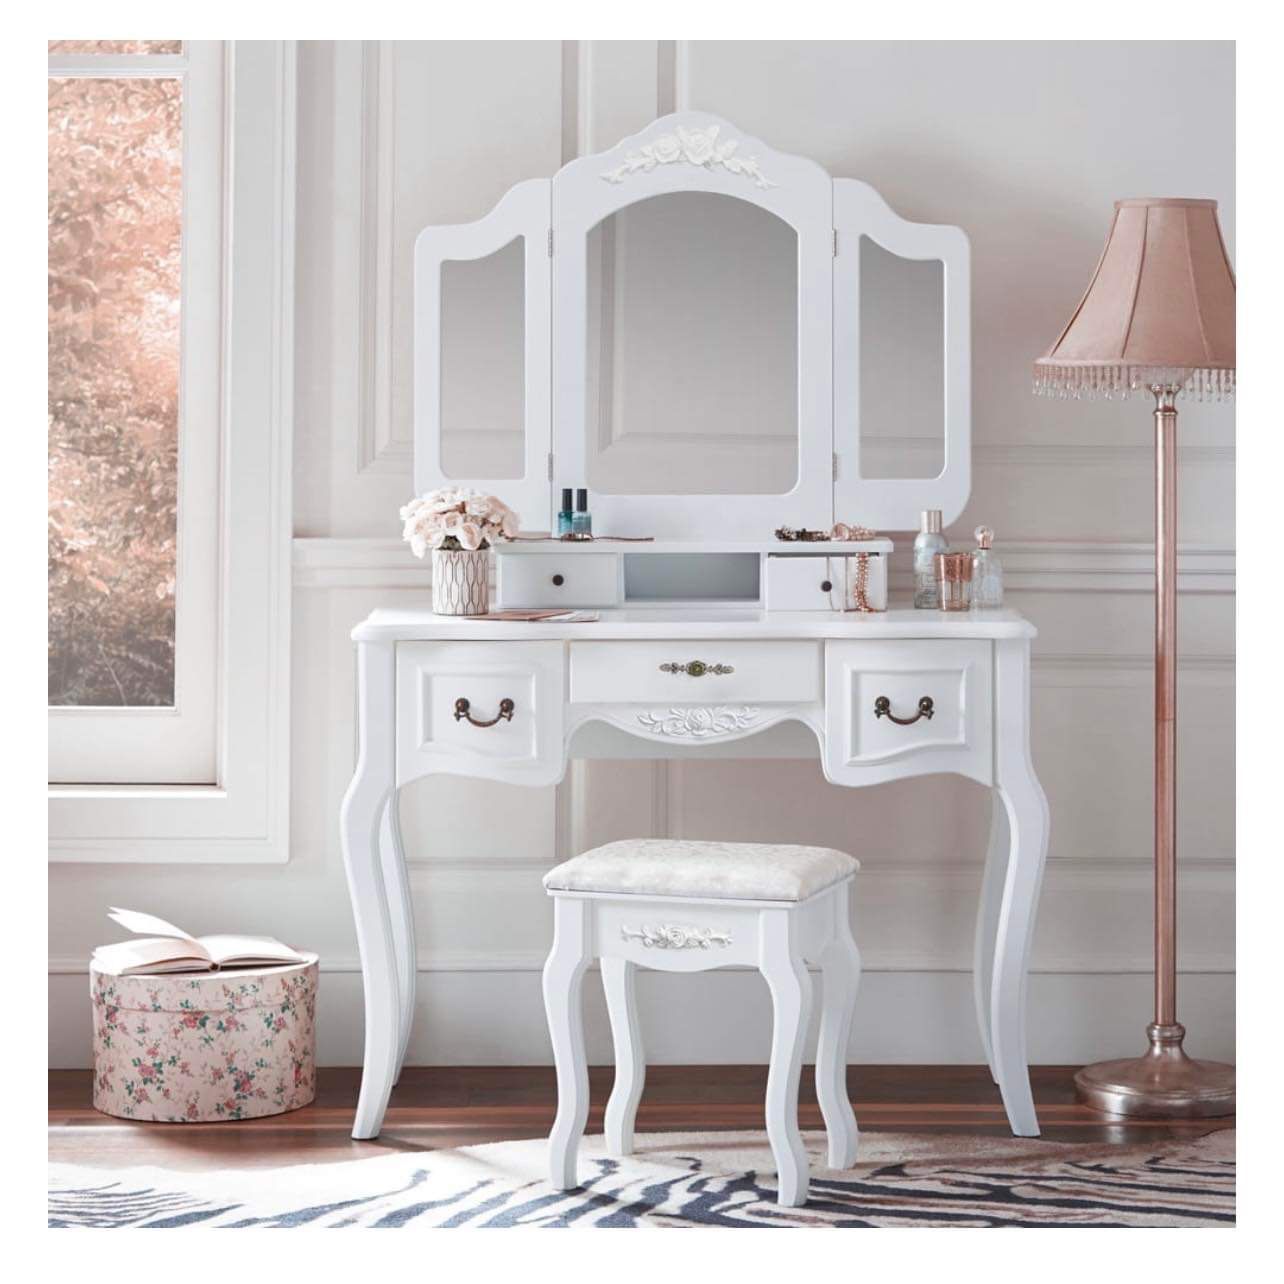 Vanity Table Set New in Original Packaging With 5 Spacious Storage Drawers, Trifold Mirror and Stool